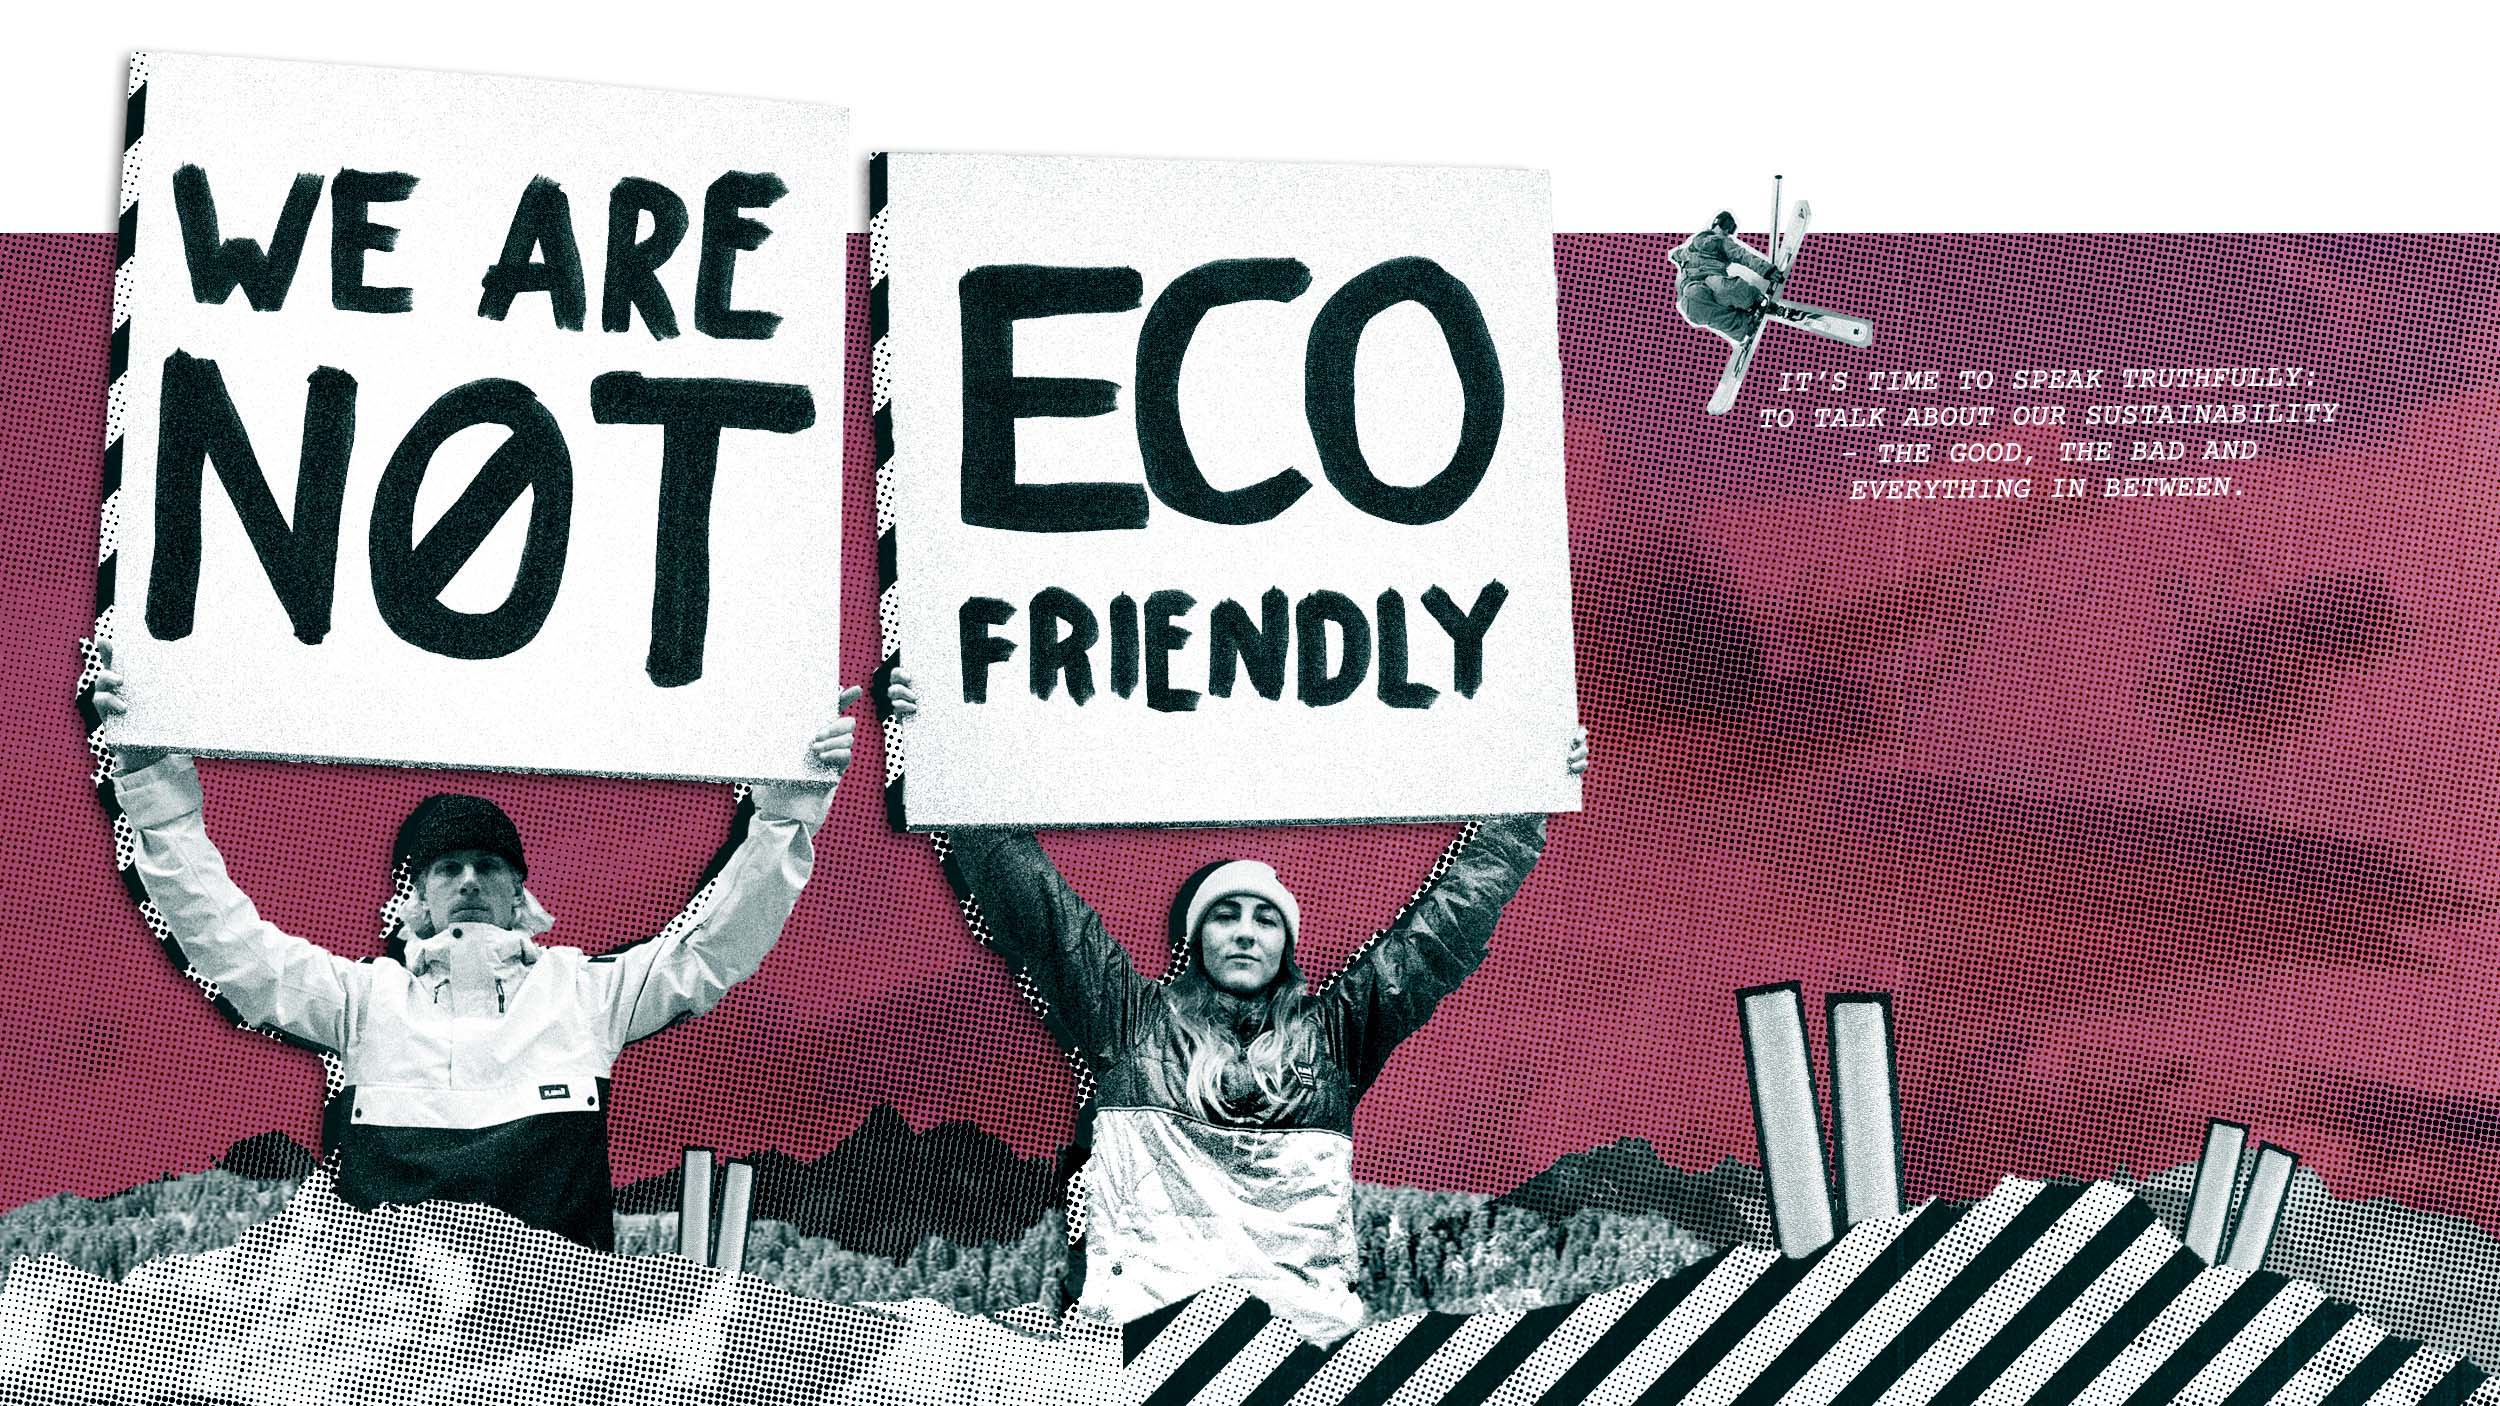 Is eco-friendly good or bad?